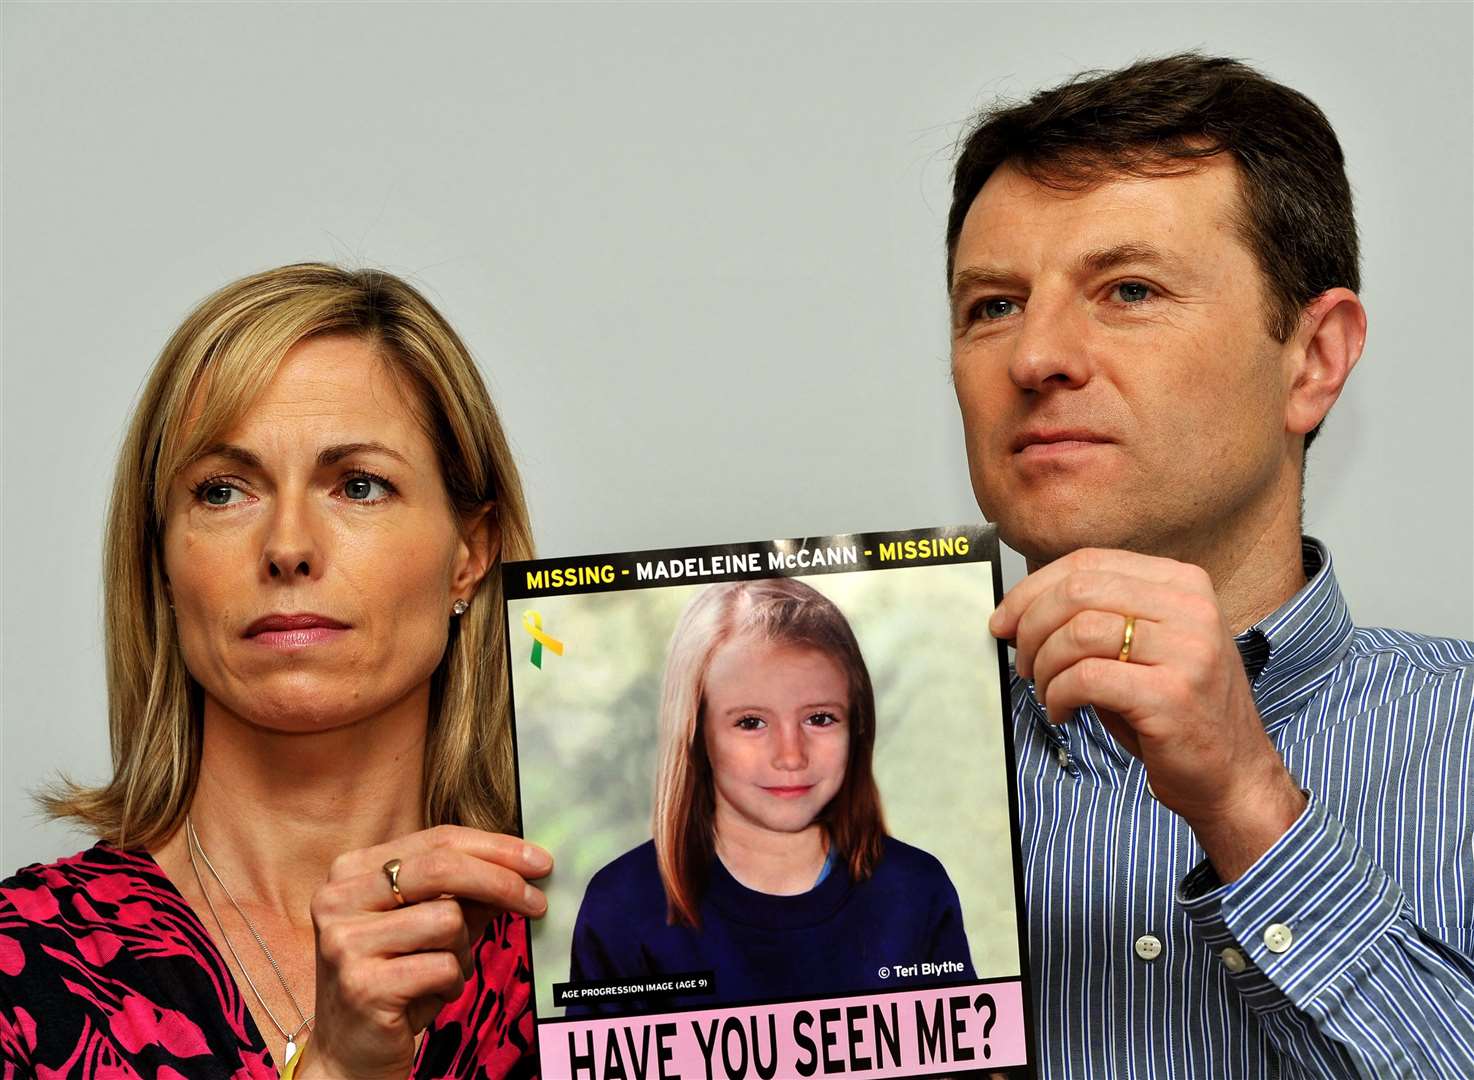 Madeleine’s parents Kate and Gerry McCann have campaigned to keep their daughter’s disappearance in the public eye for 16 years (John Stillwell/PA)